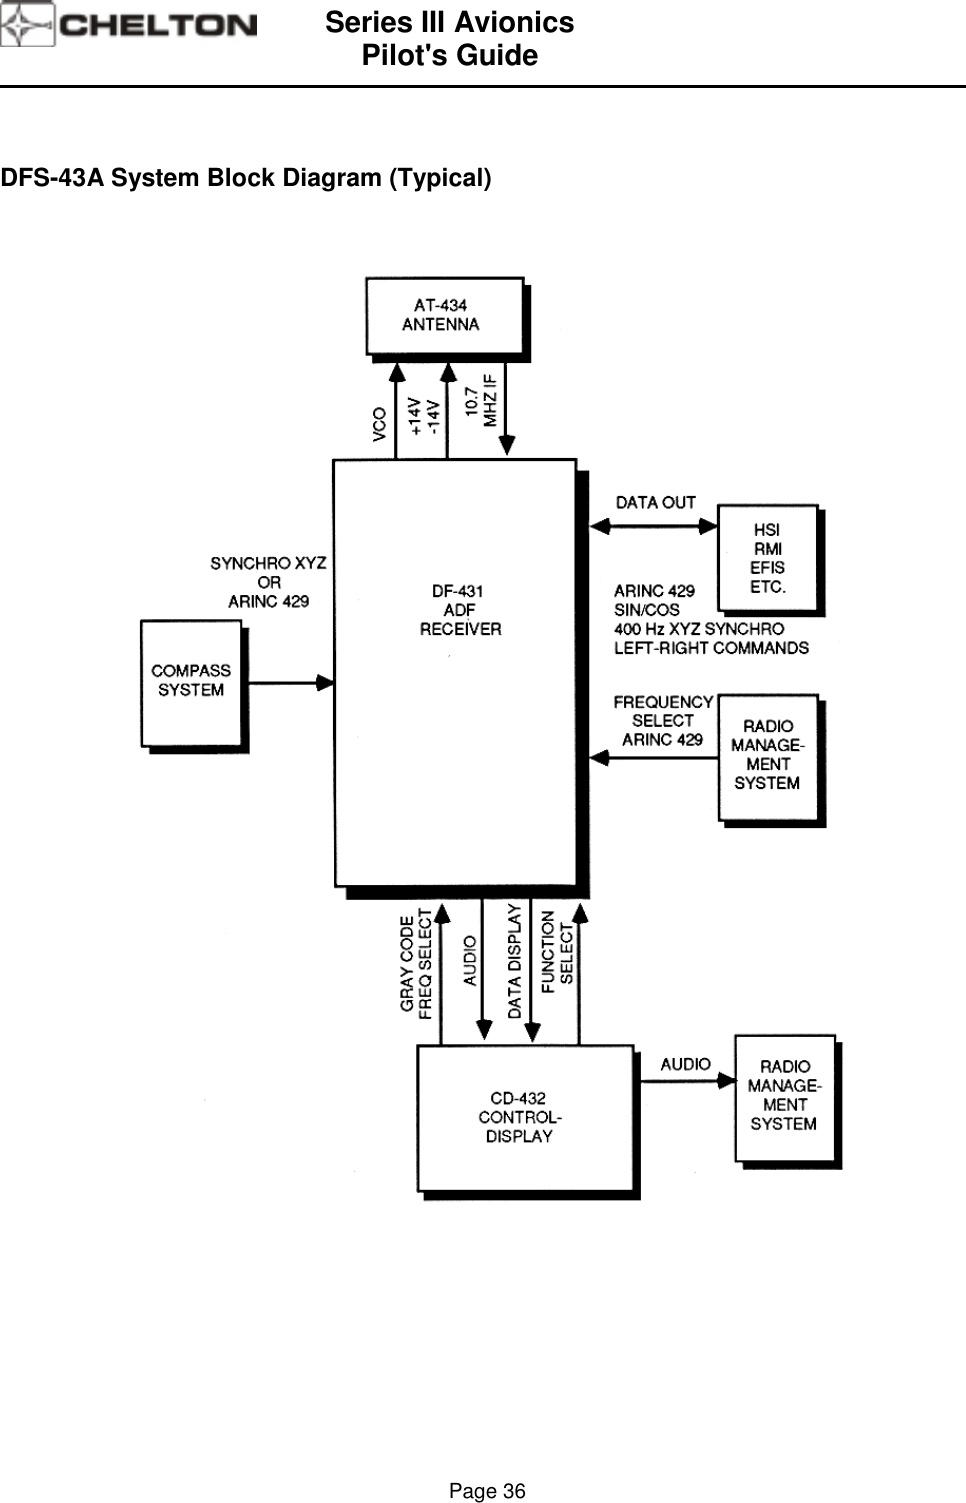 Series III AvionicsPilot&apos;s Guide                                                                                                                                          Page 36DFS-43A System Block Diagram (Typical)